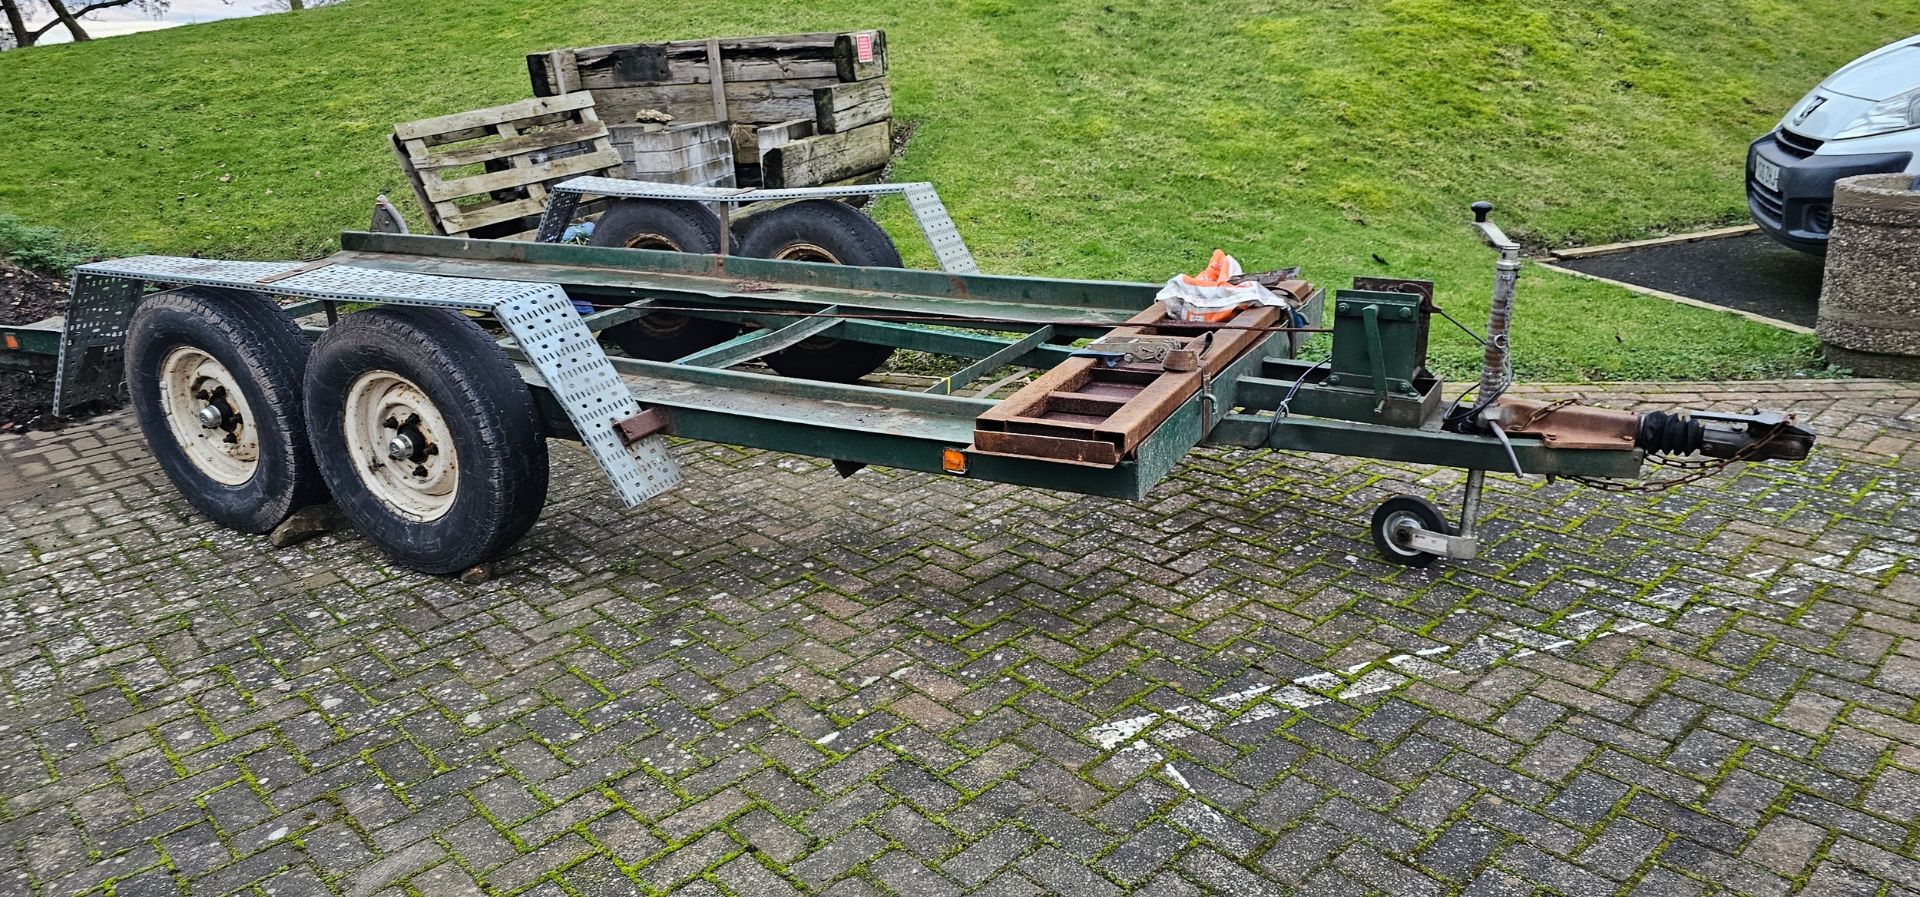 A heavy duty twin axle car trailer with ramps and winch, Knott Avonride 1800 kgs axles with the